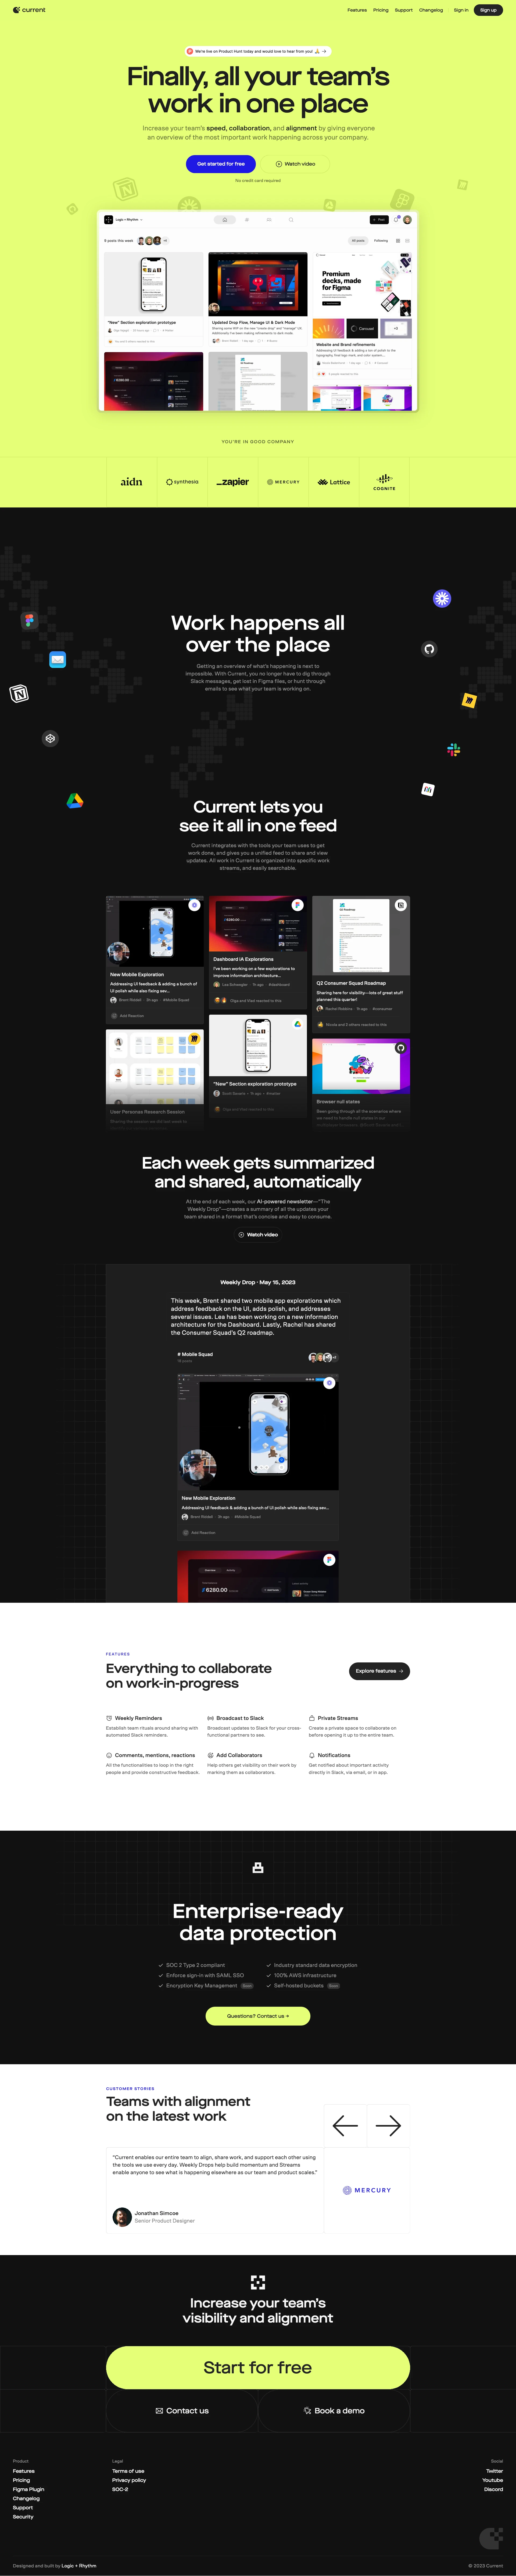 Current Landing Page Example: All your team’s work in one place. Increase your team’s speed, collaboration, and alignment by using Current to find and share the most important work happening across your company.